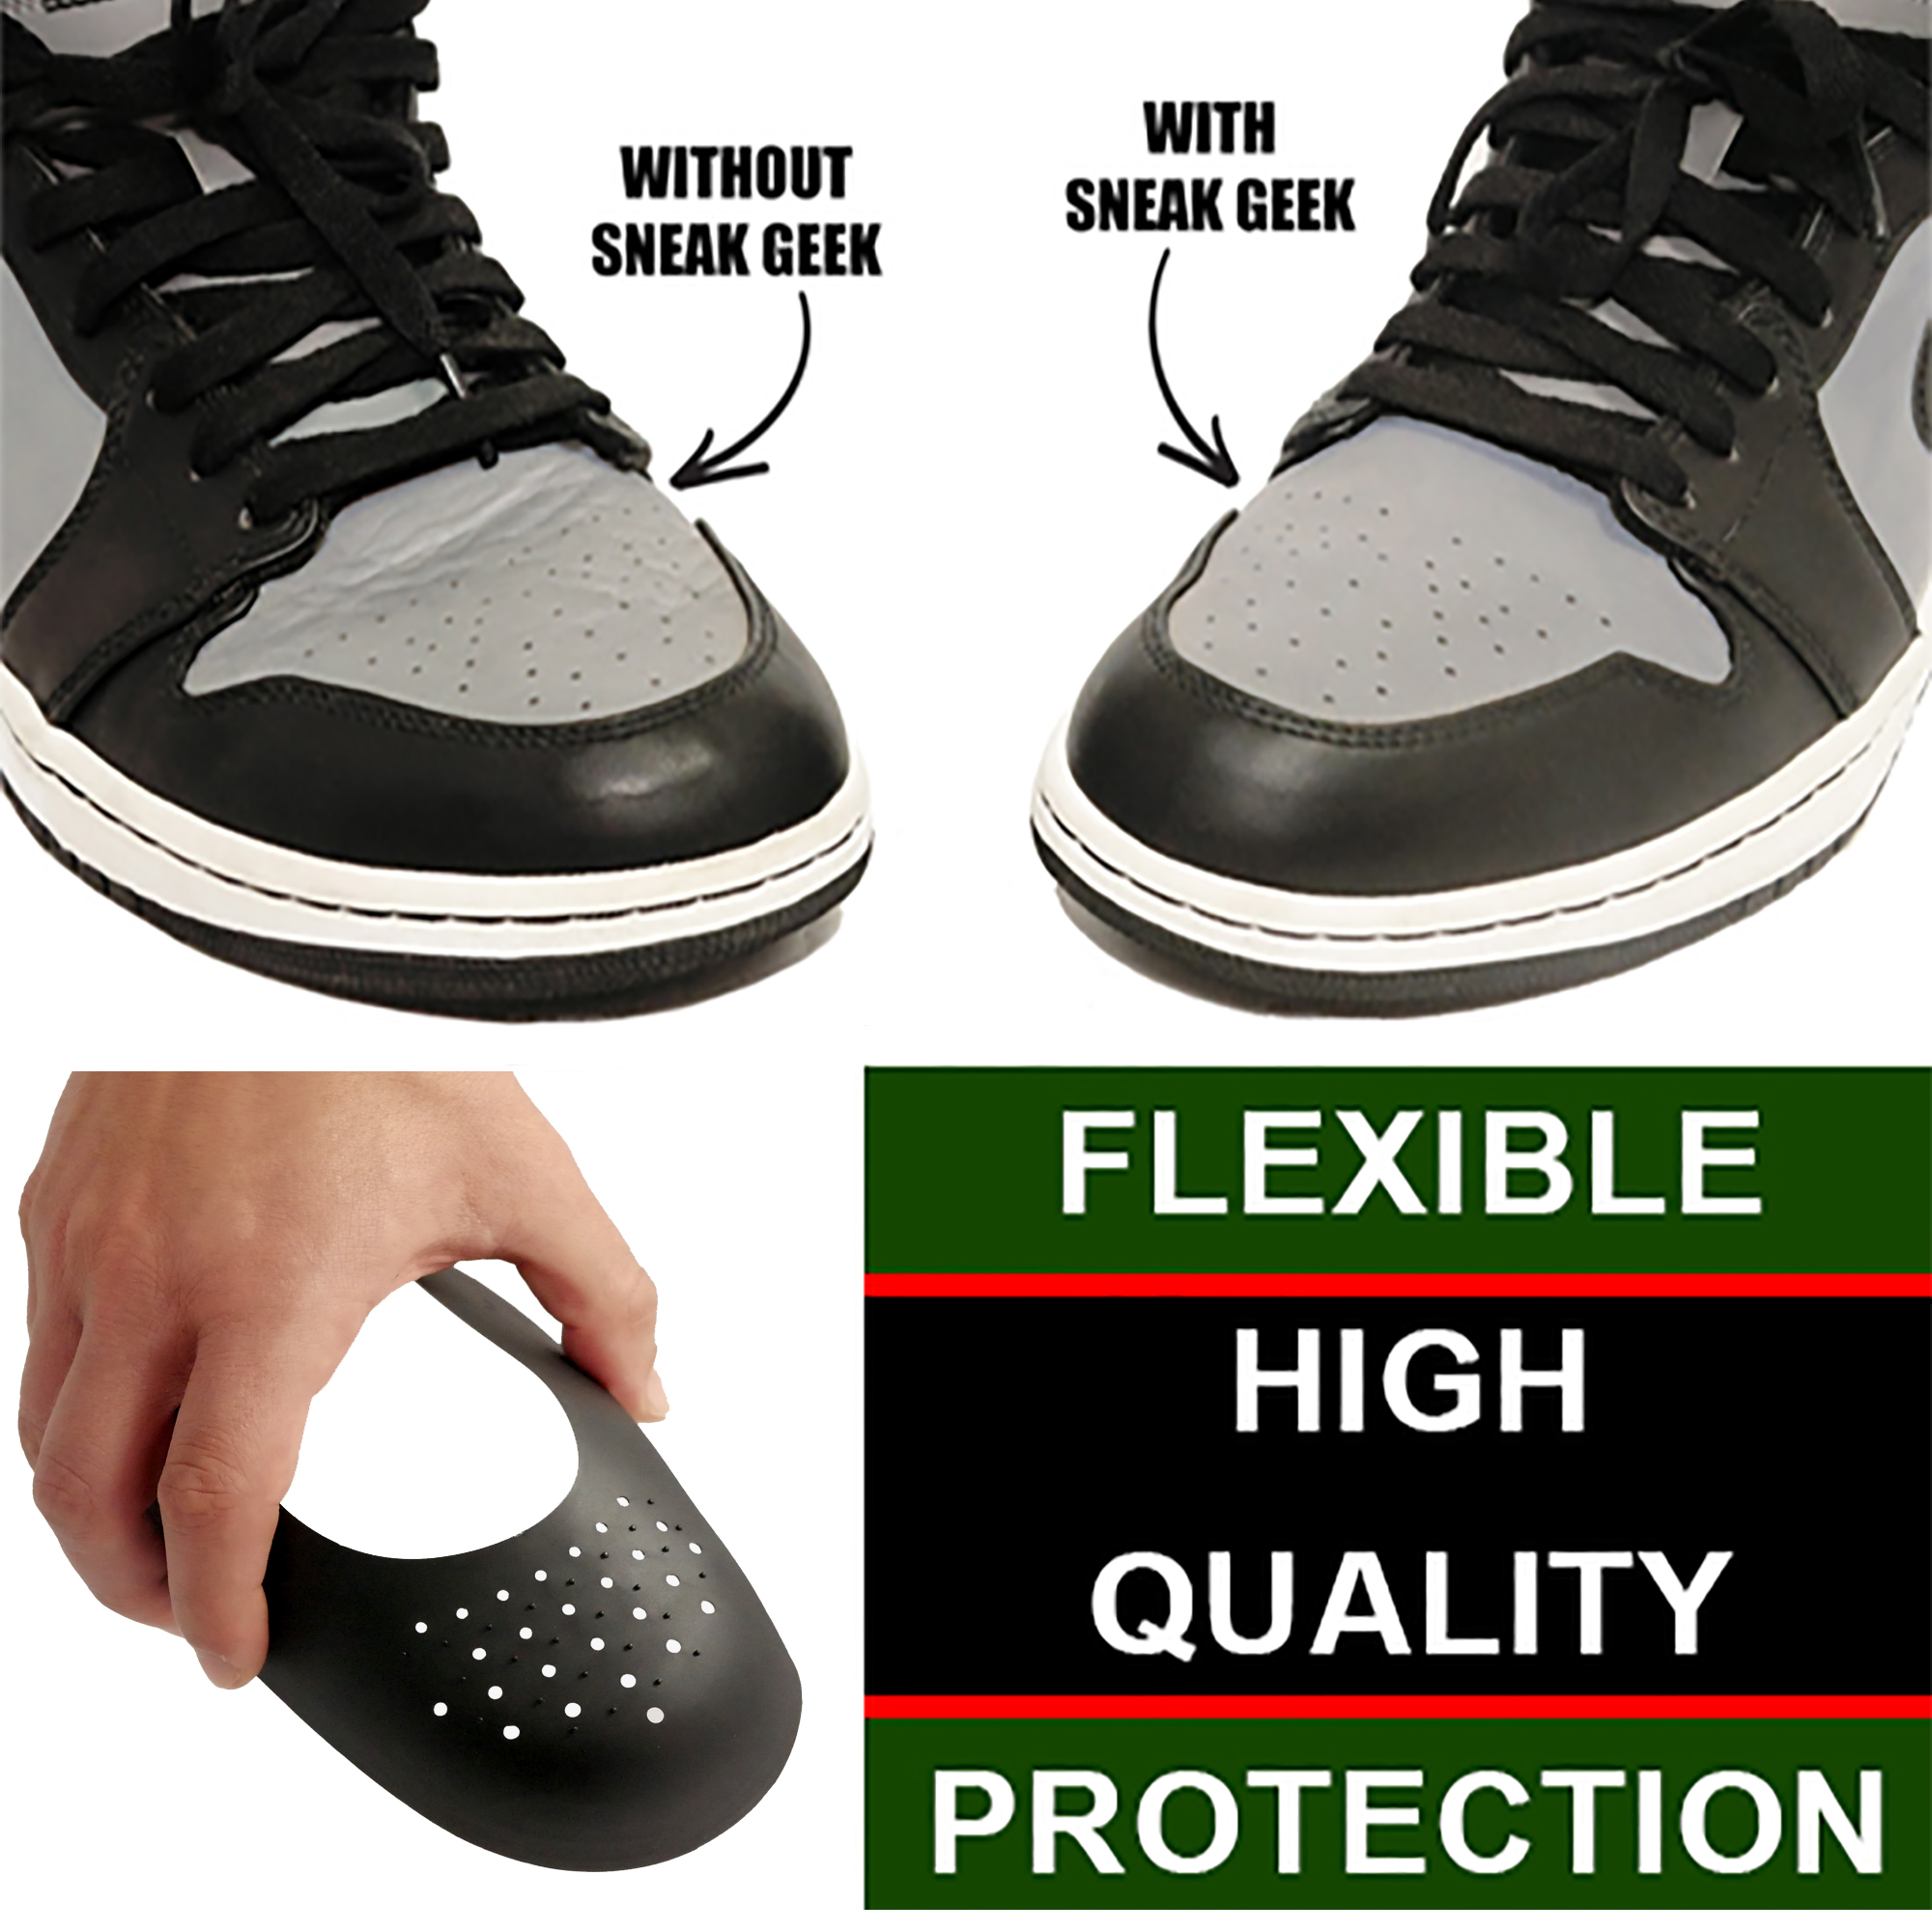 Shoe Crease Protector for Mens Shoes 8-12 Black Sneaker Crease Preventer - image 2 of 6